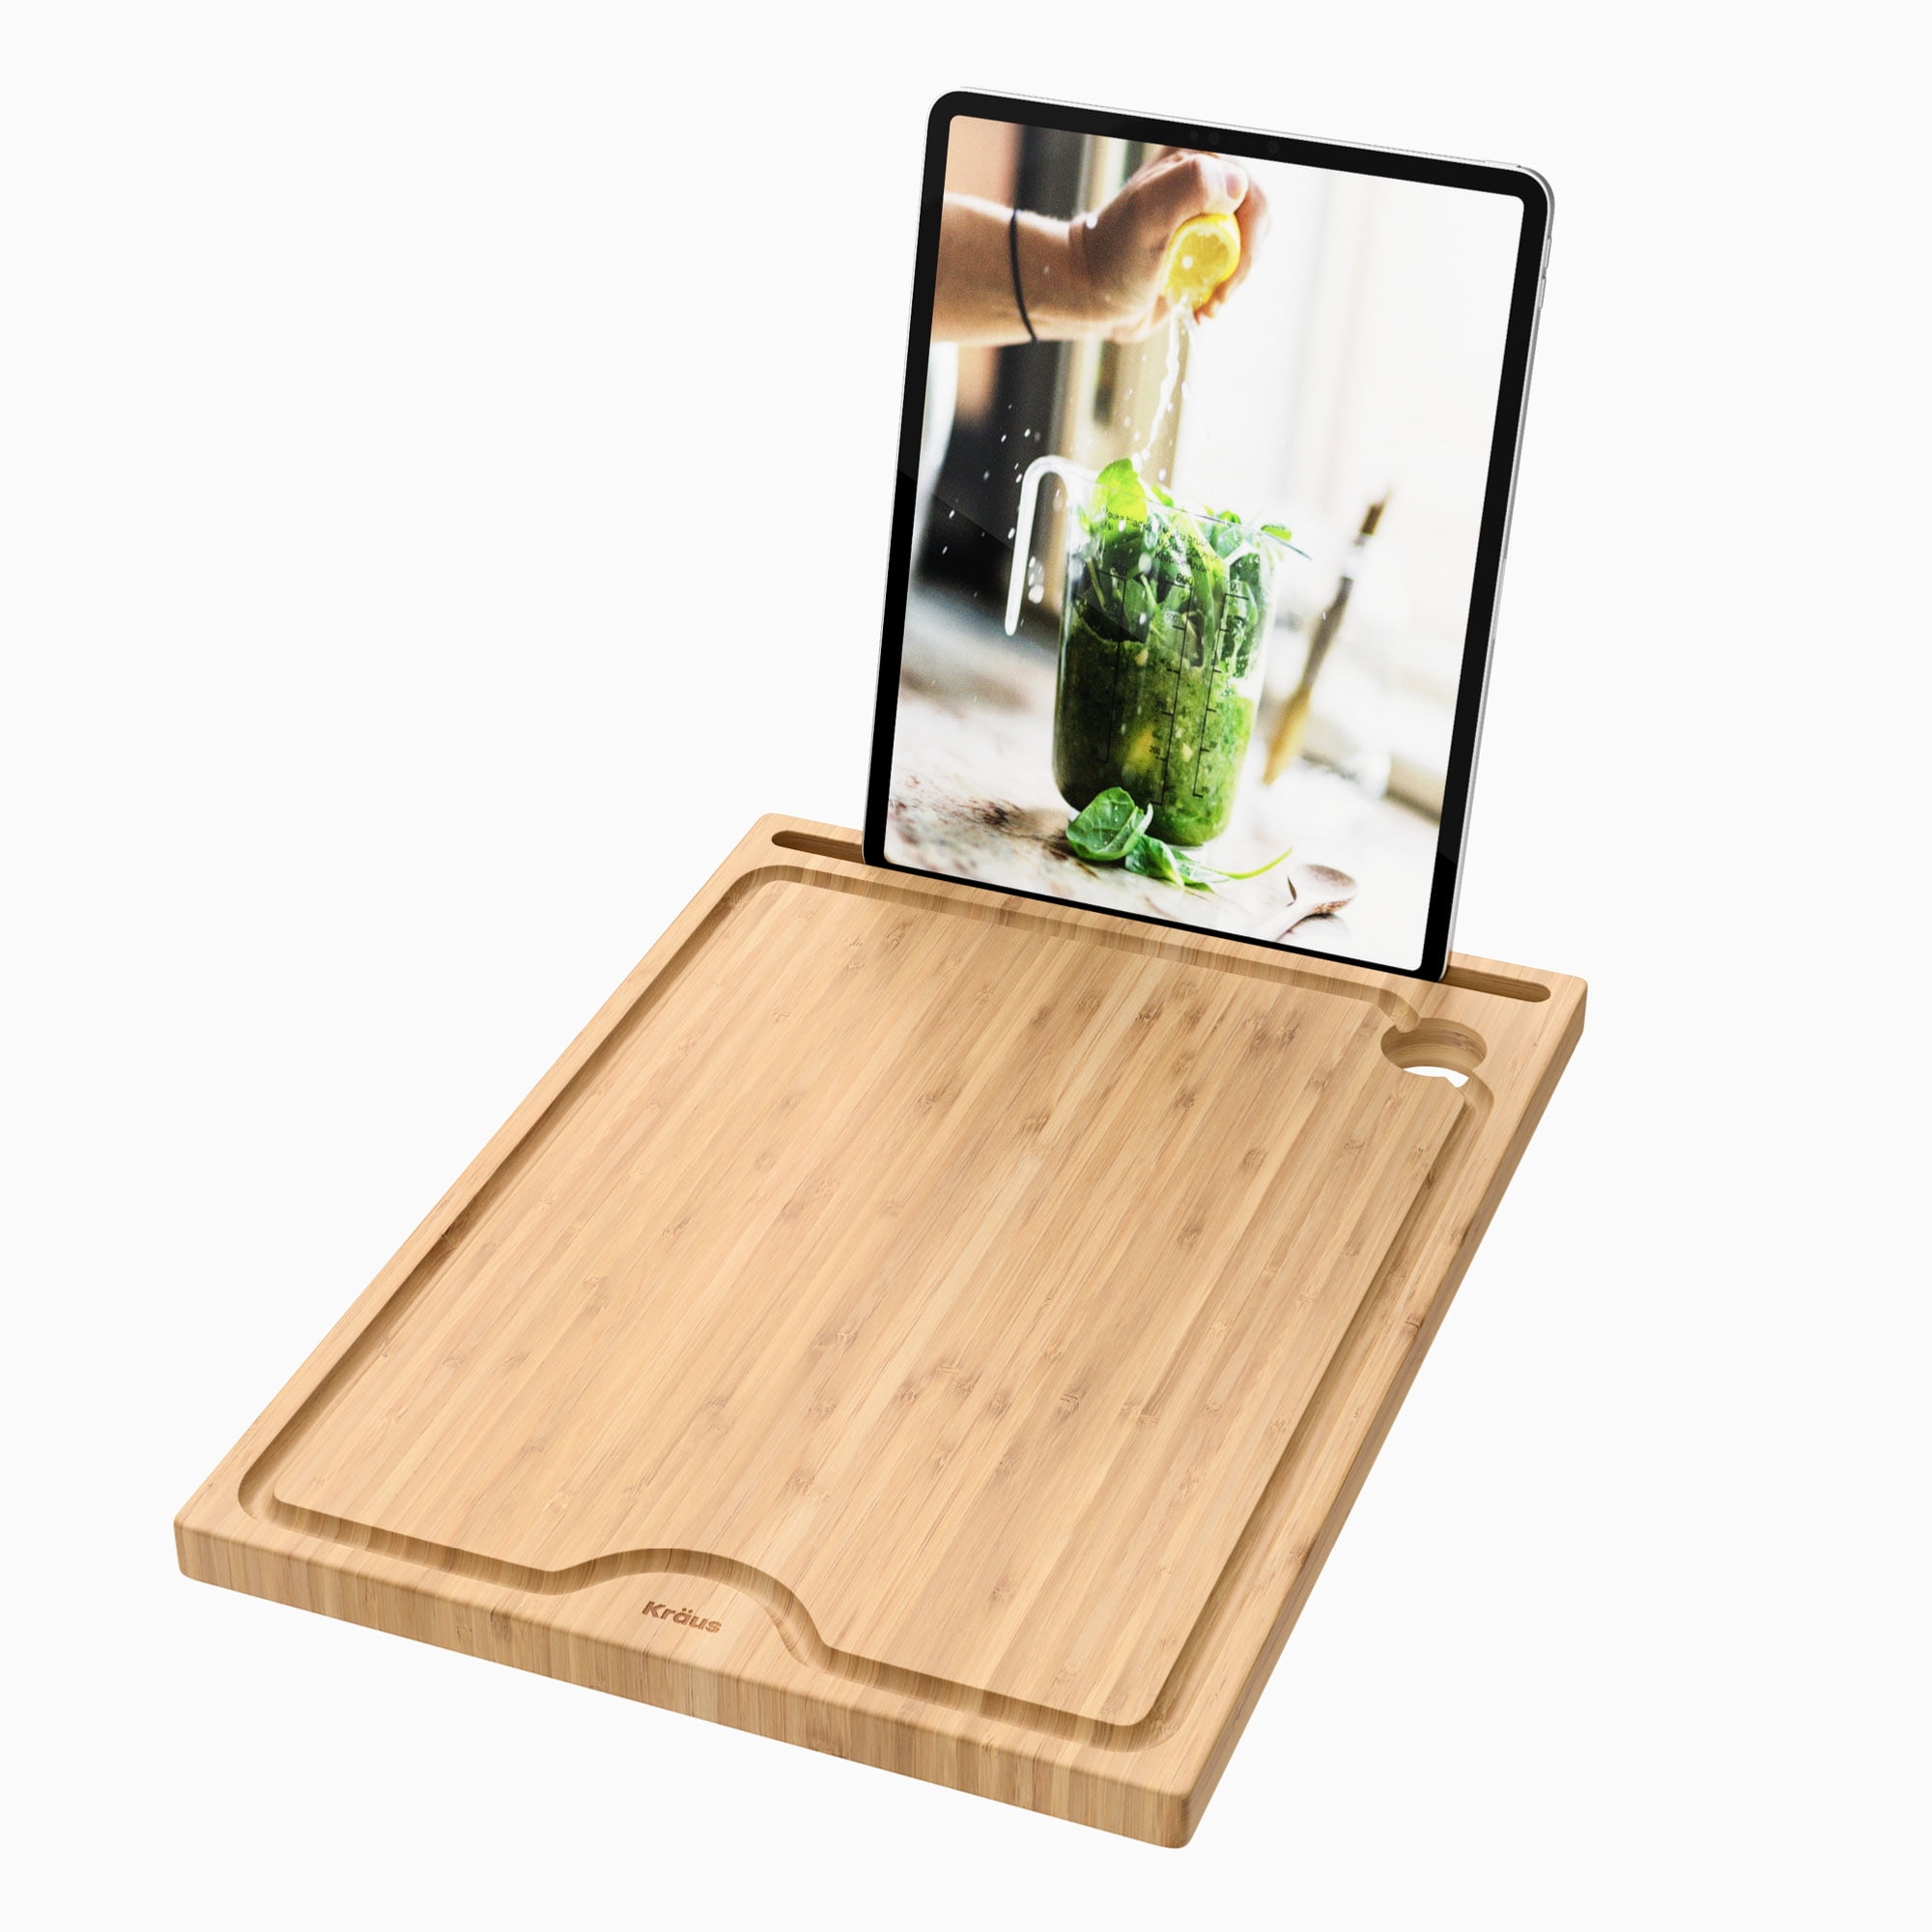 Solid Bamboo Cutting Board with Mobile Device Holder for Standard Kitchen  Sink or Countertop Measuring 19-1/2'' W x 12'' D x 3/4'' H by KRAUS